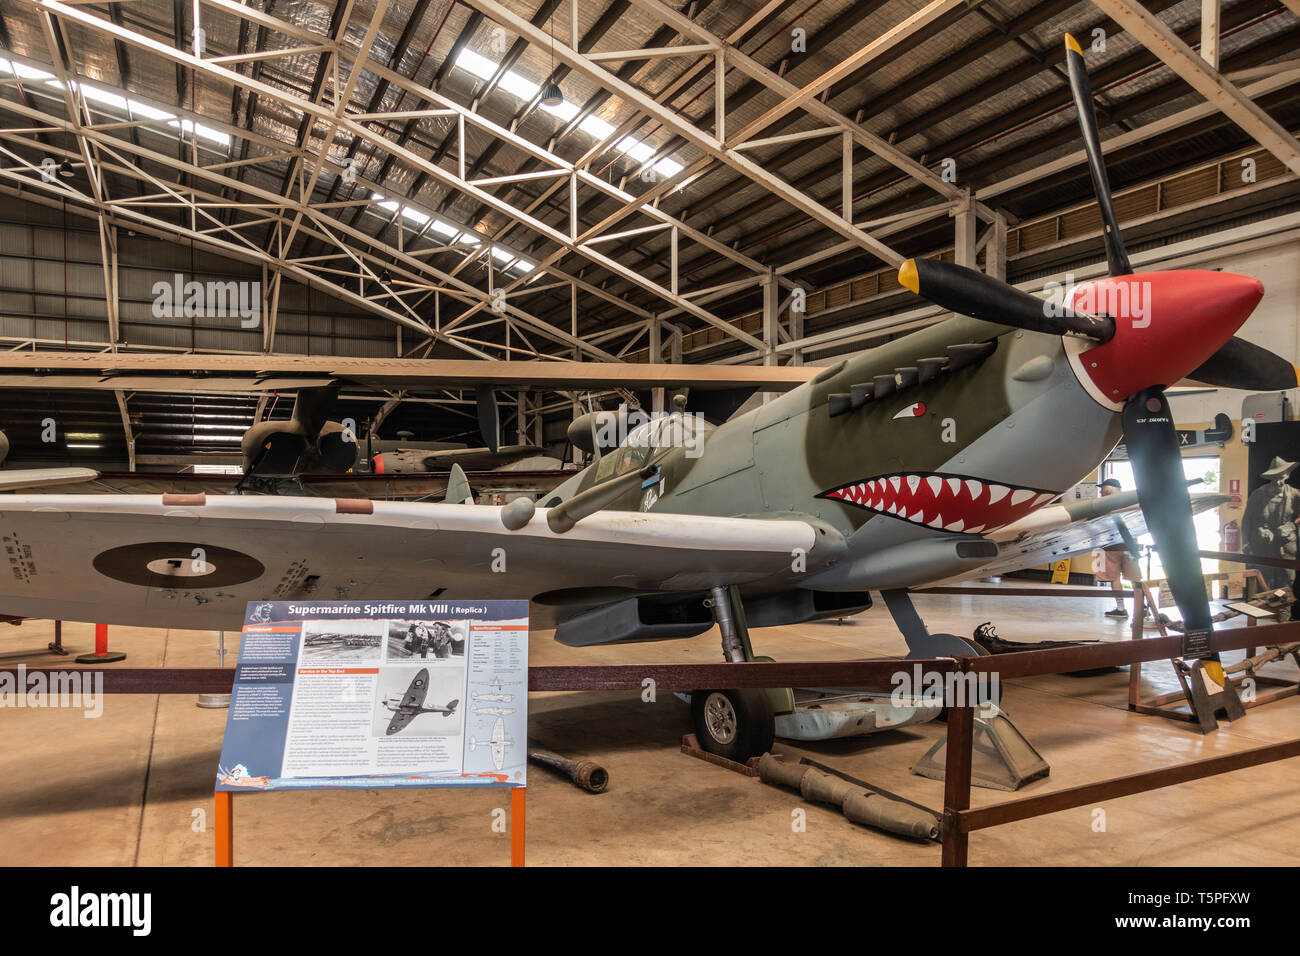 Darwin Australia - February 22, 2019: Australian Aviation Heritage Centre. The Supermarine Spitfire MK VIII with shark face painted in front. Stock Photo